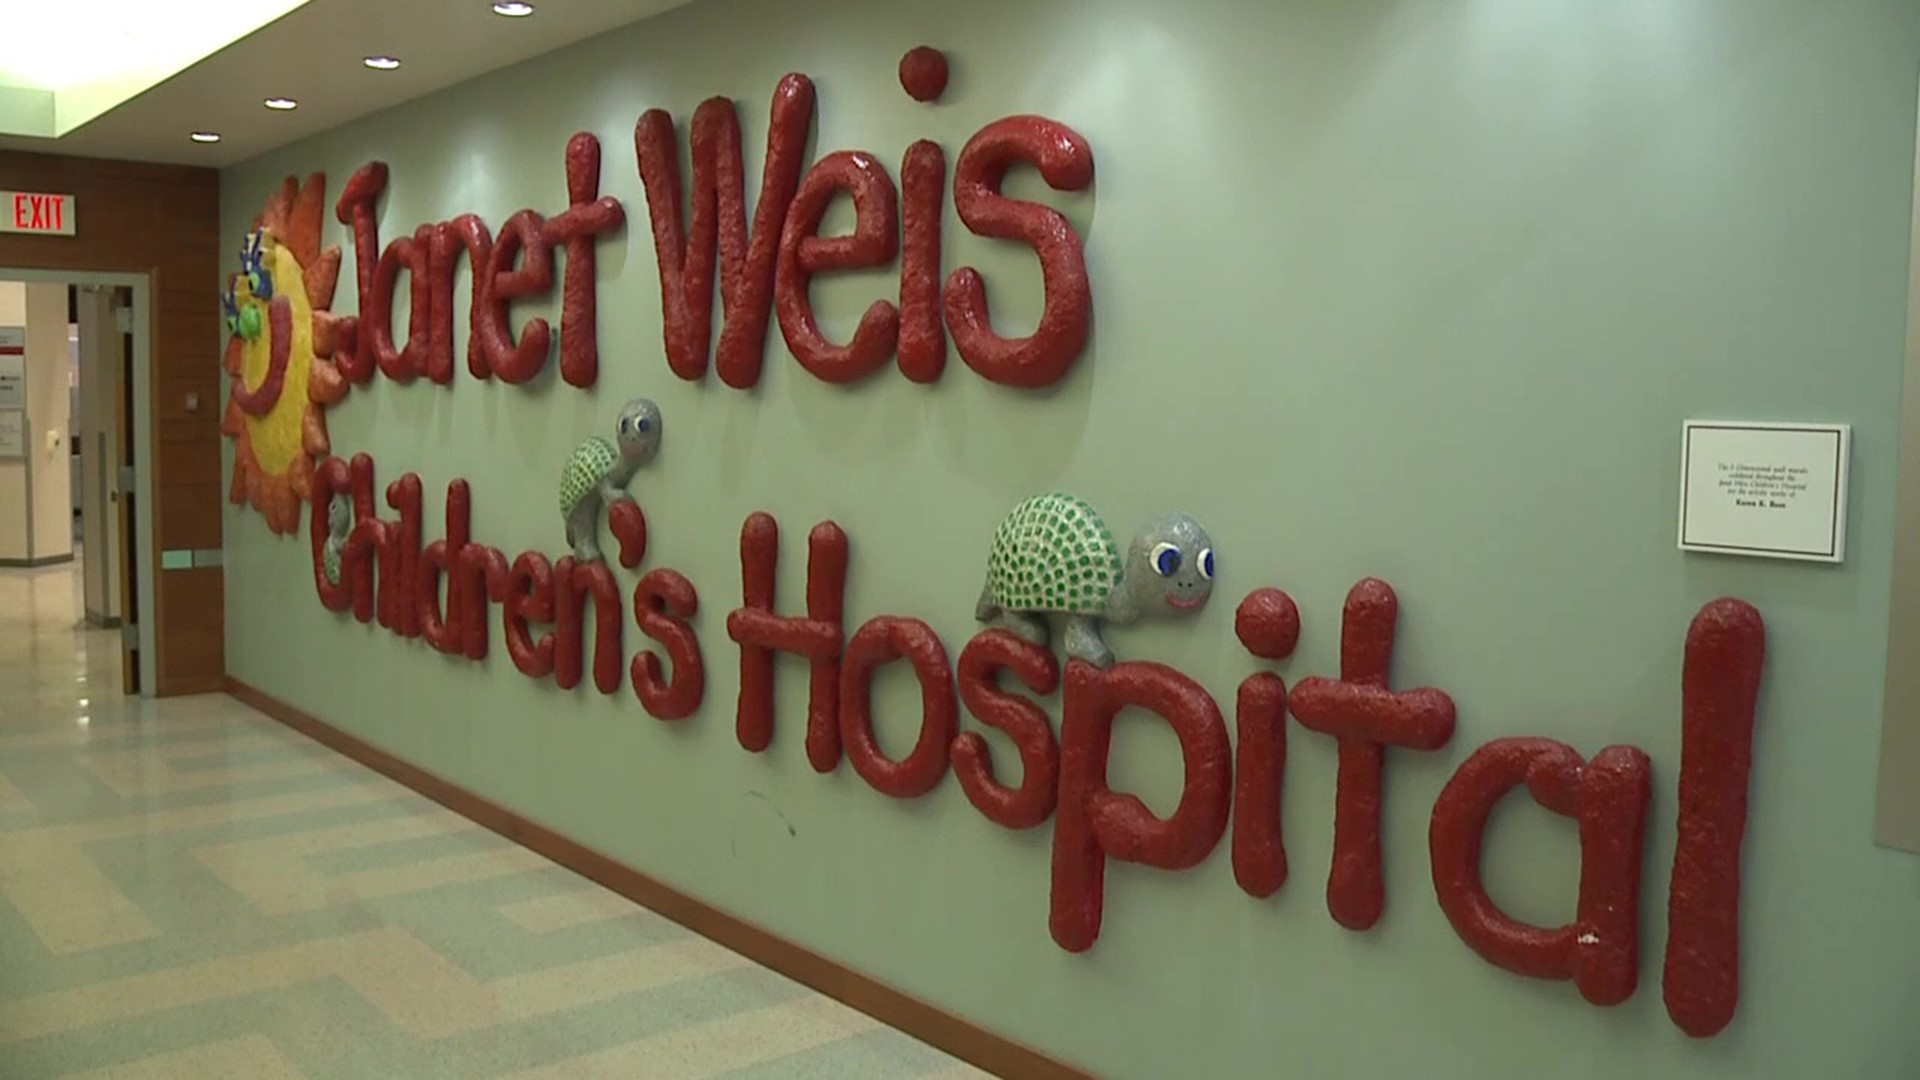 Geisinger's children's hospital has been operating near capacity for months, but only a small number of patients have had to be transferred to other facilities.